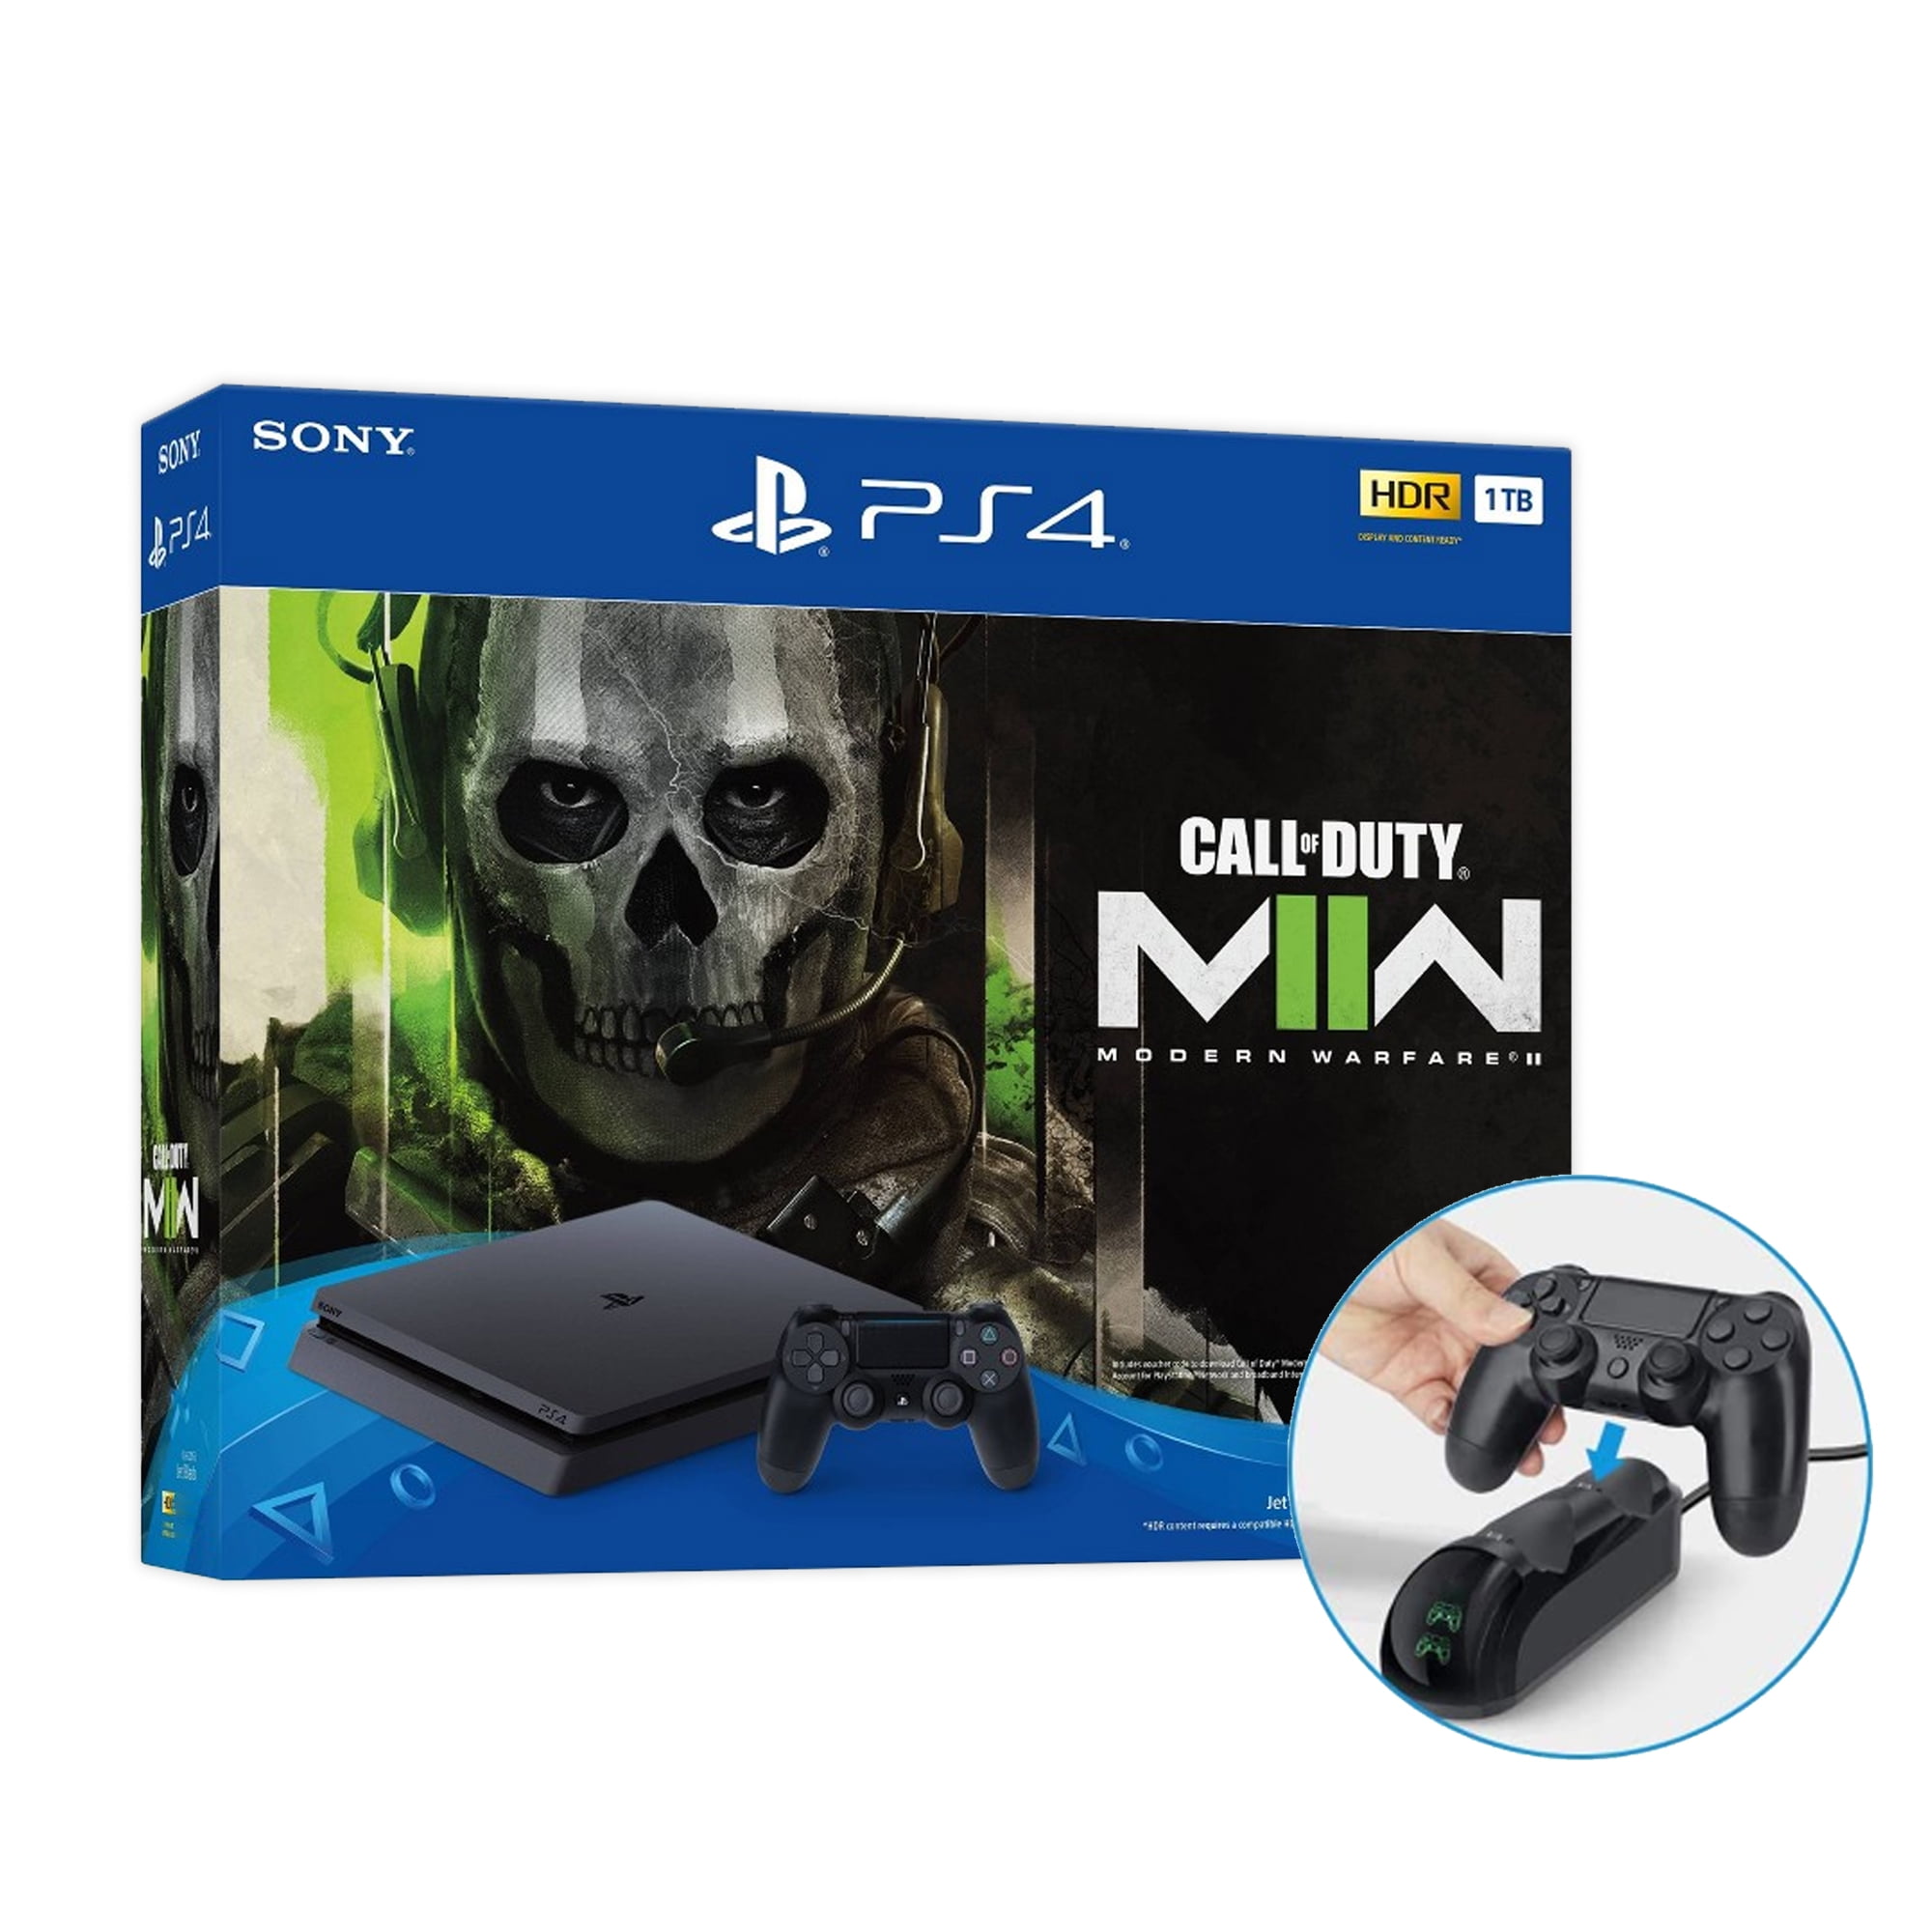 Sony PlayStation 4 Slim Call of Modern Warfare II Bundle PS4 Gaming Console, Jet Black, Mytrix Dual-Controller Fast Charger - Walmart.com